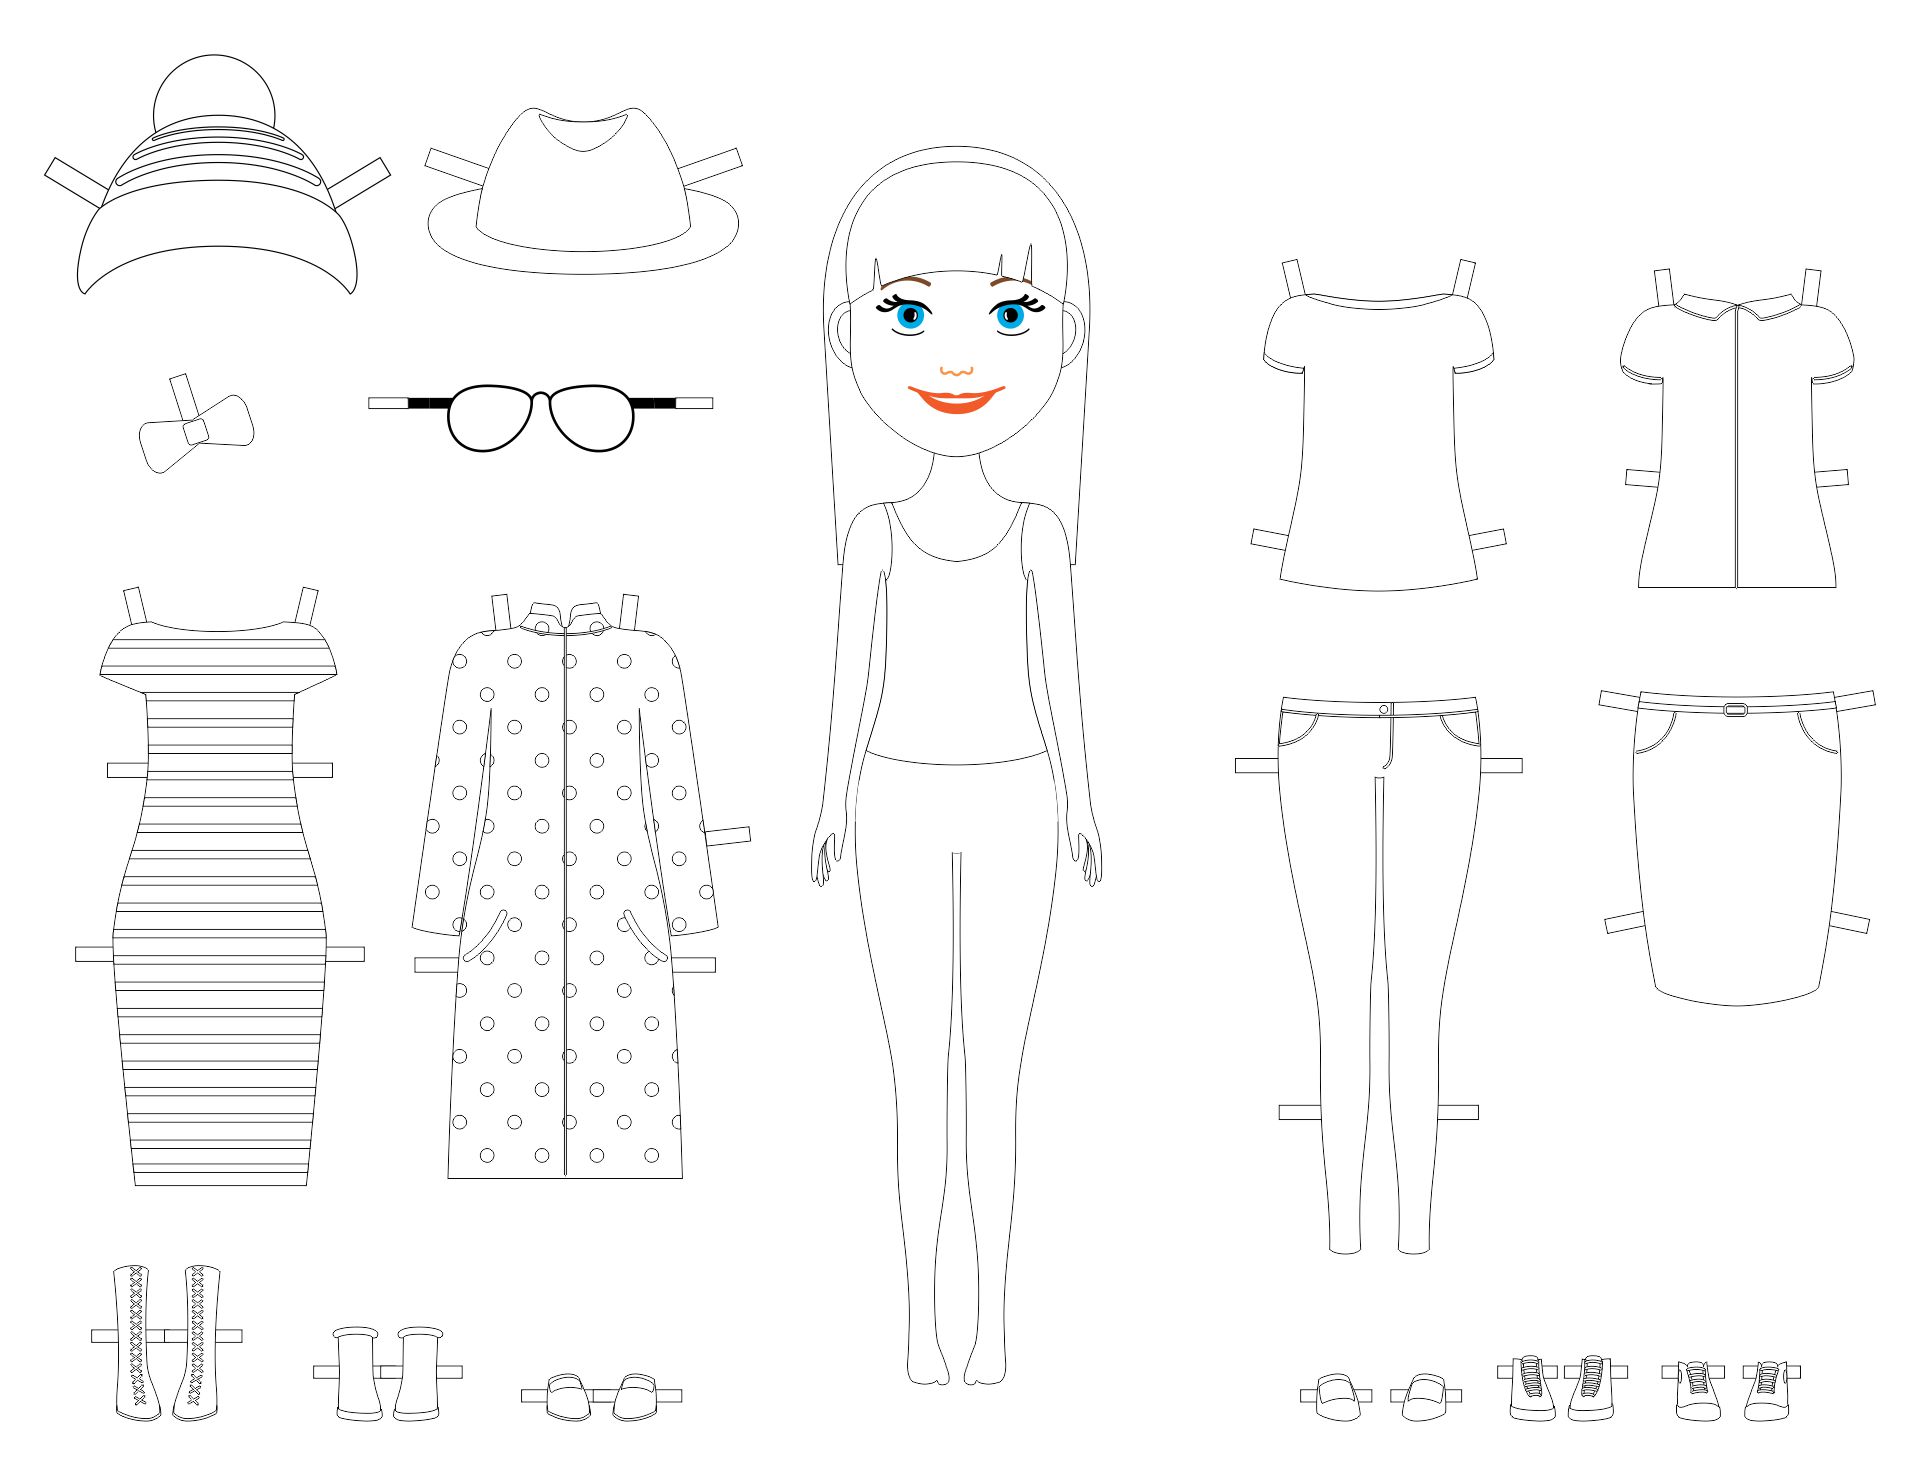 9 Best Images of Printable Paper Dolls To Color - Coloring Paper Dolls ...